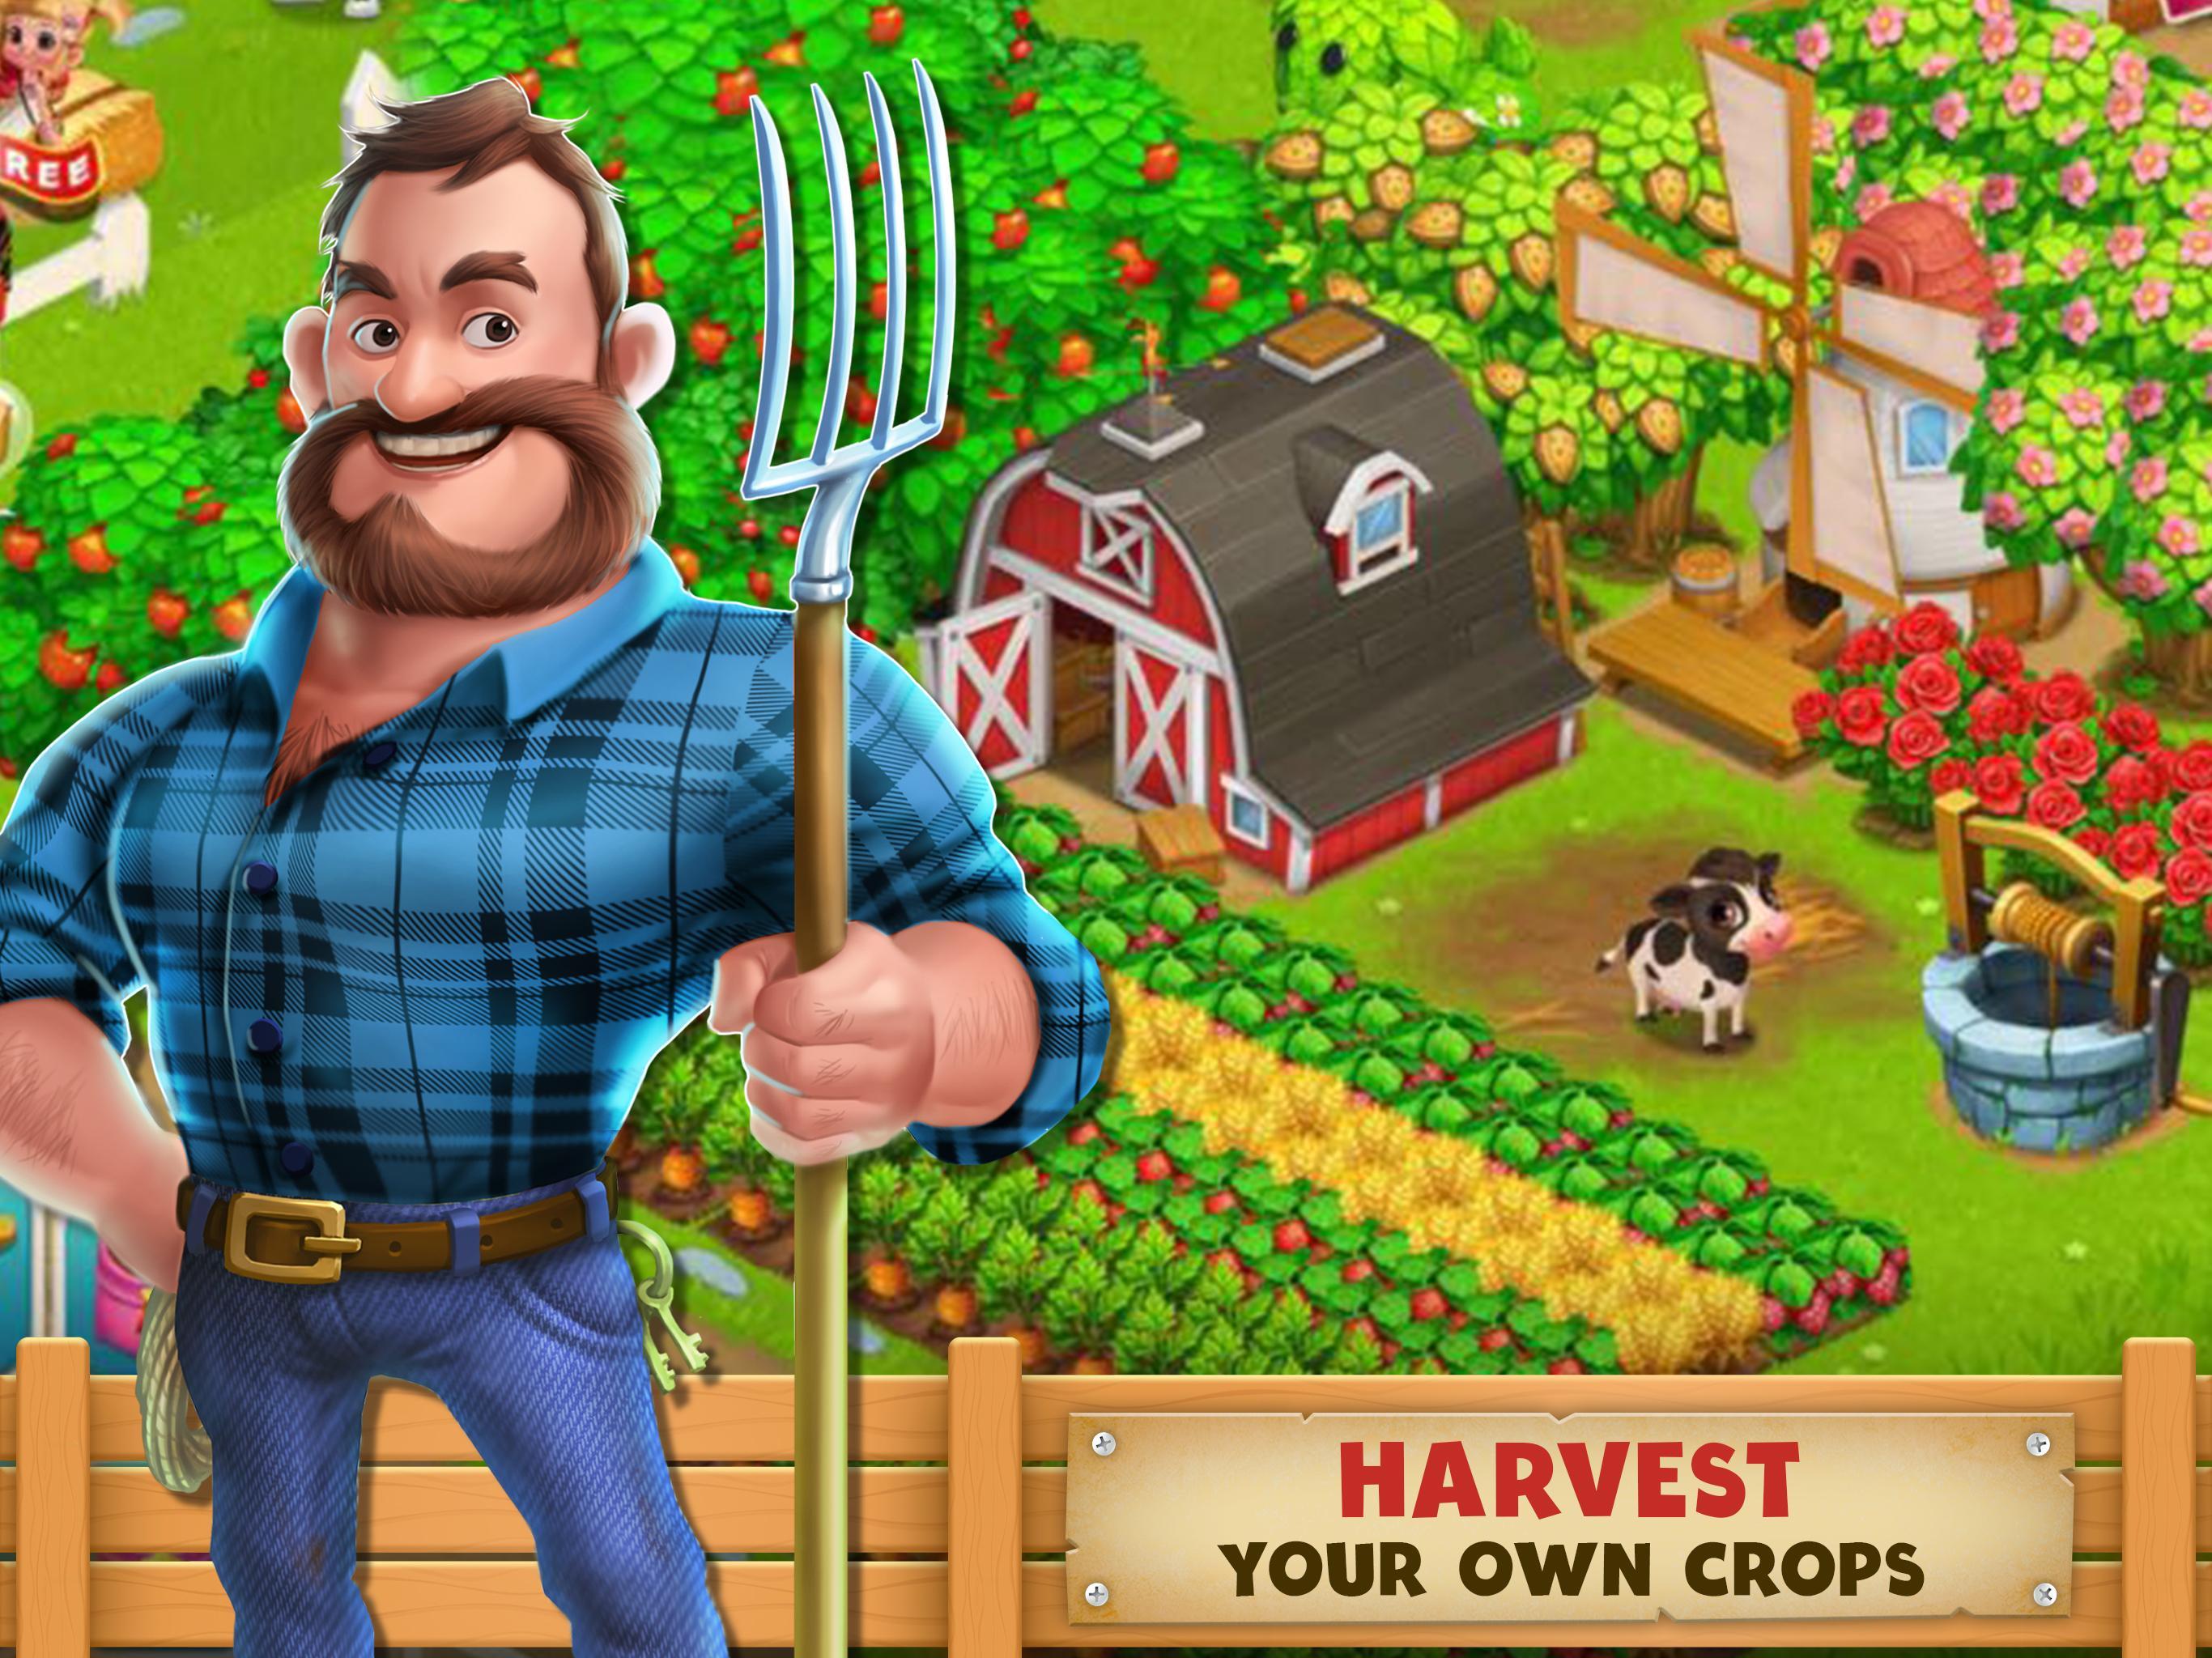 Cooking Country for Android - APK Download